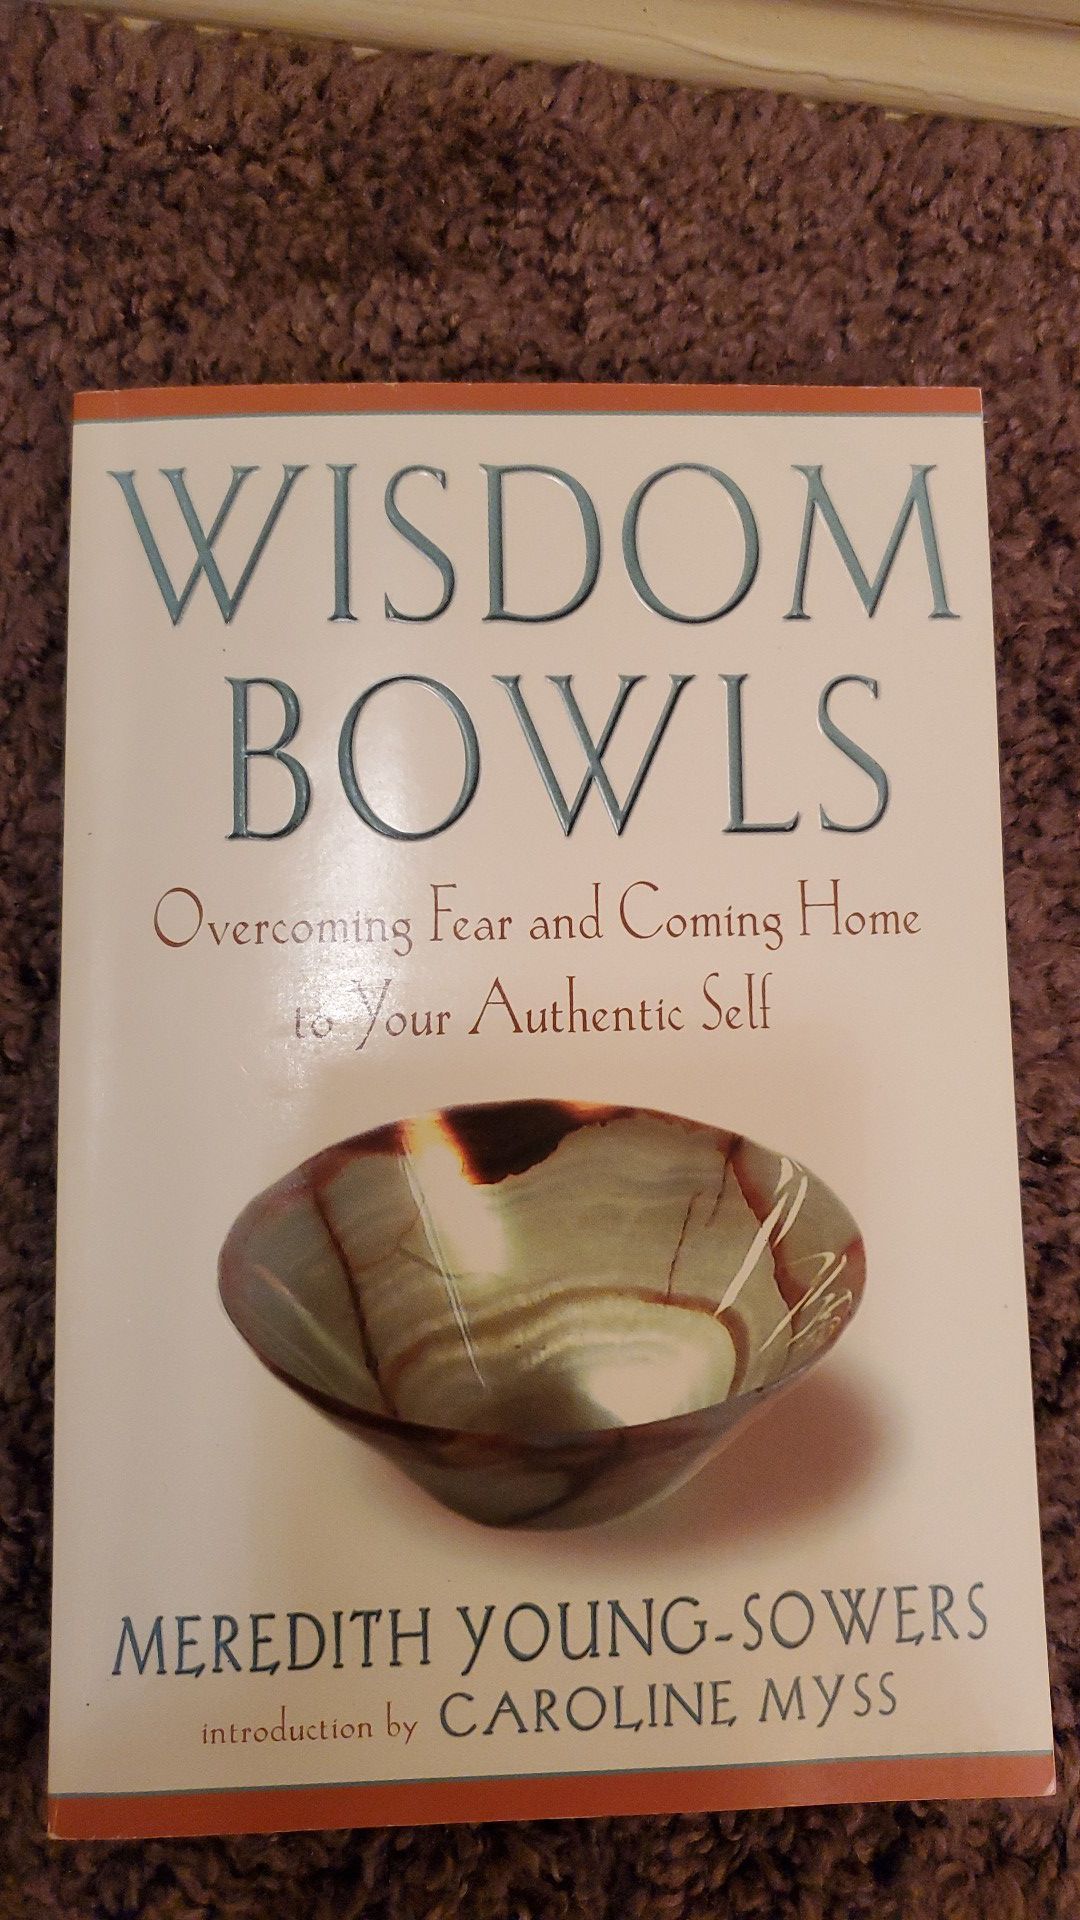 Wisdom Bowls (Overcoming Fear And Coming Home to Your Authentic Self)